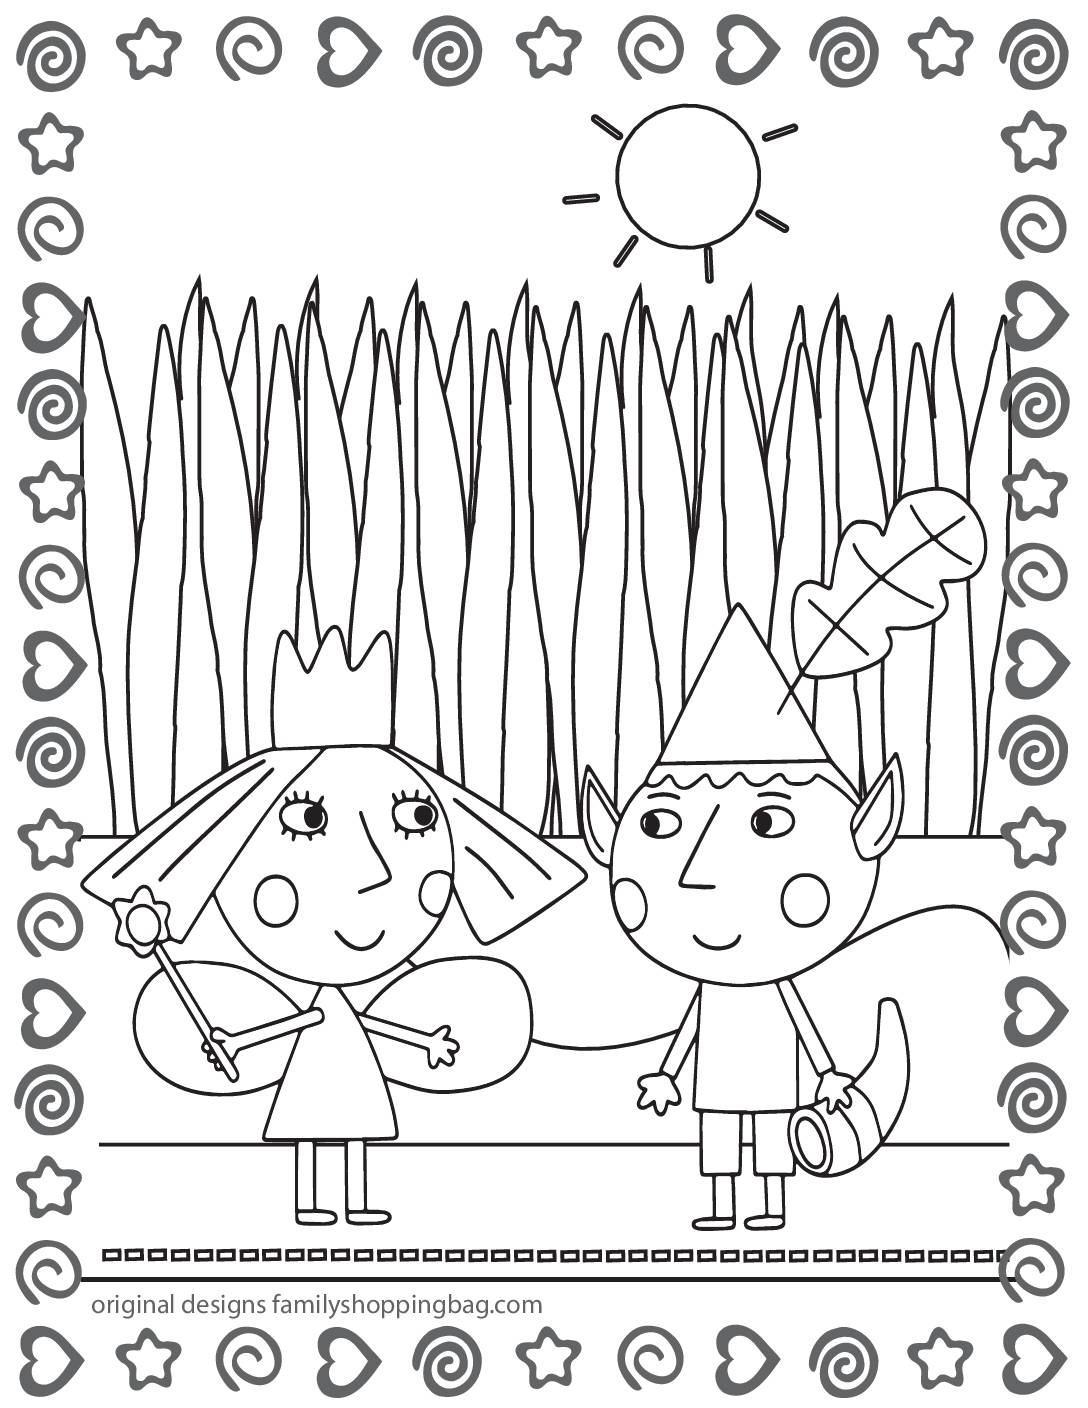 Coloring Page 7 Ben & Holly Coloring Pages